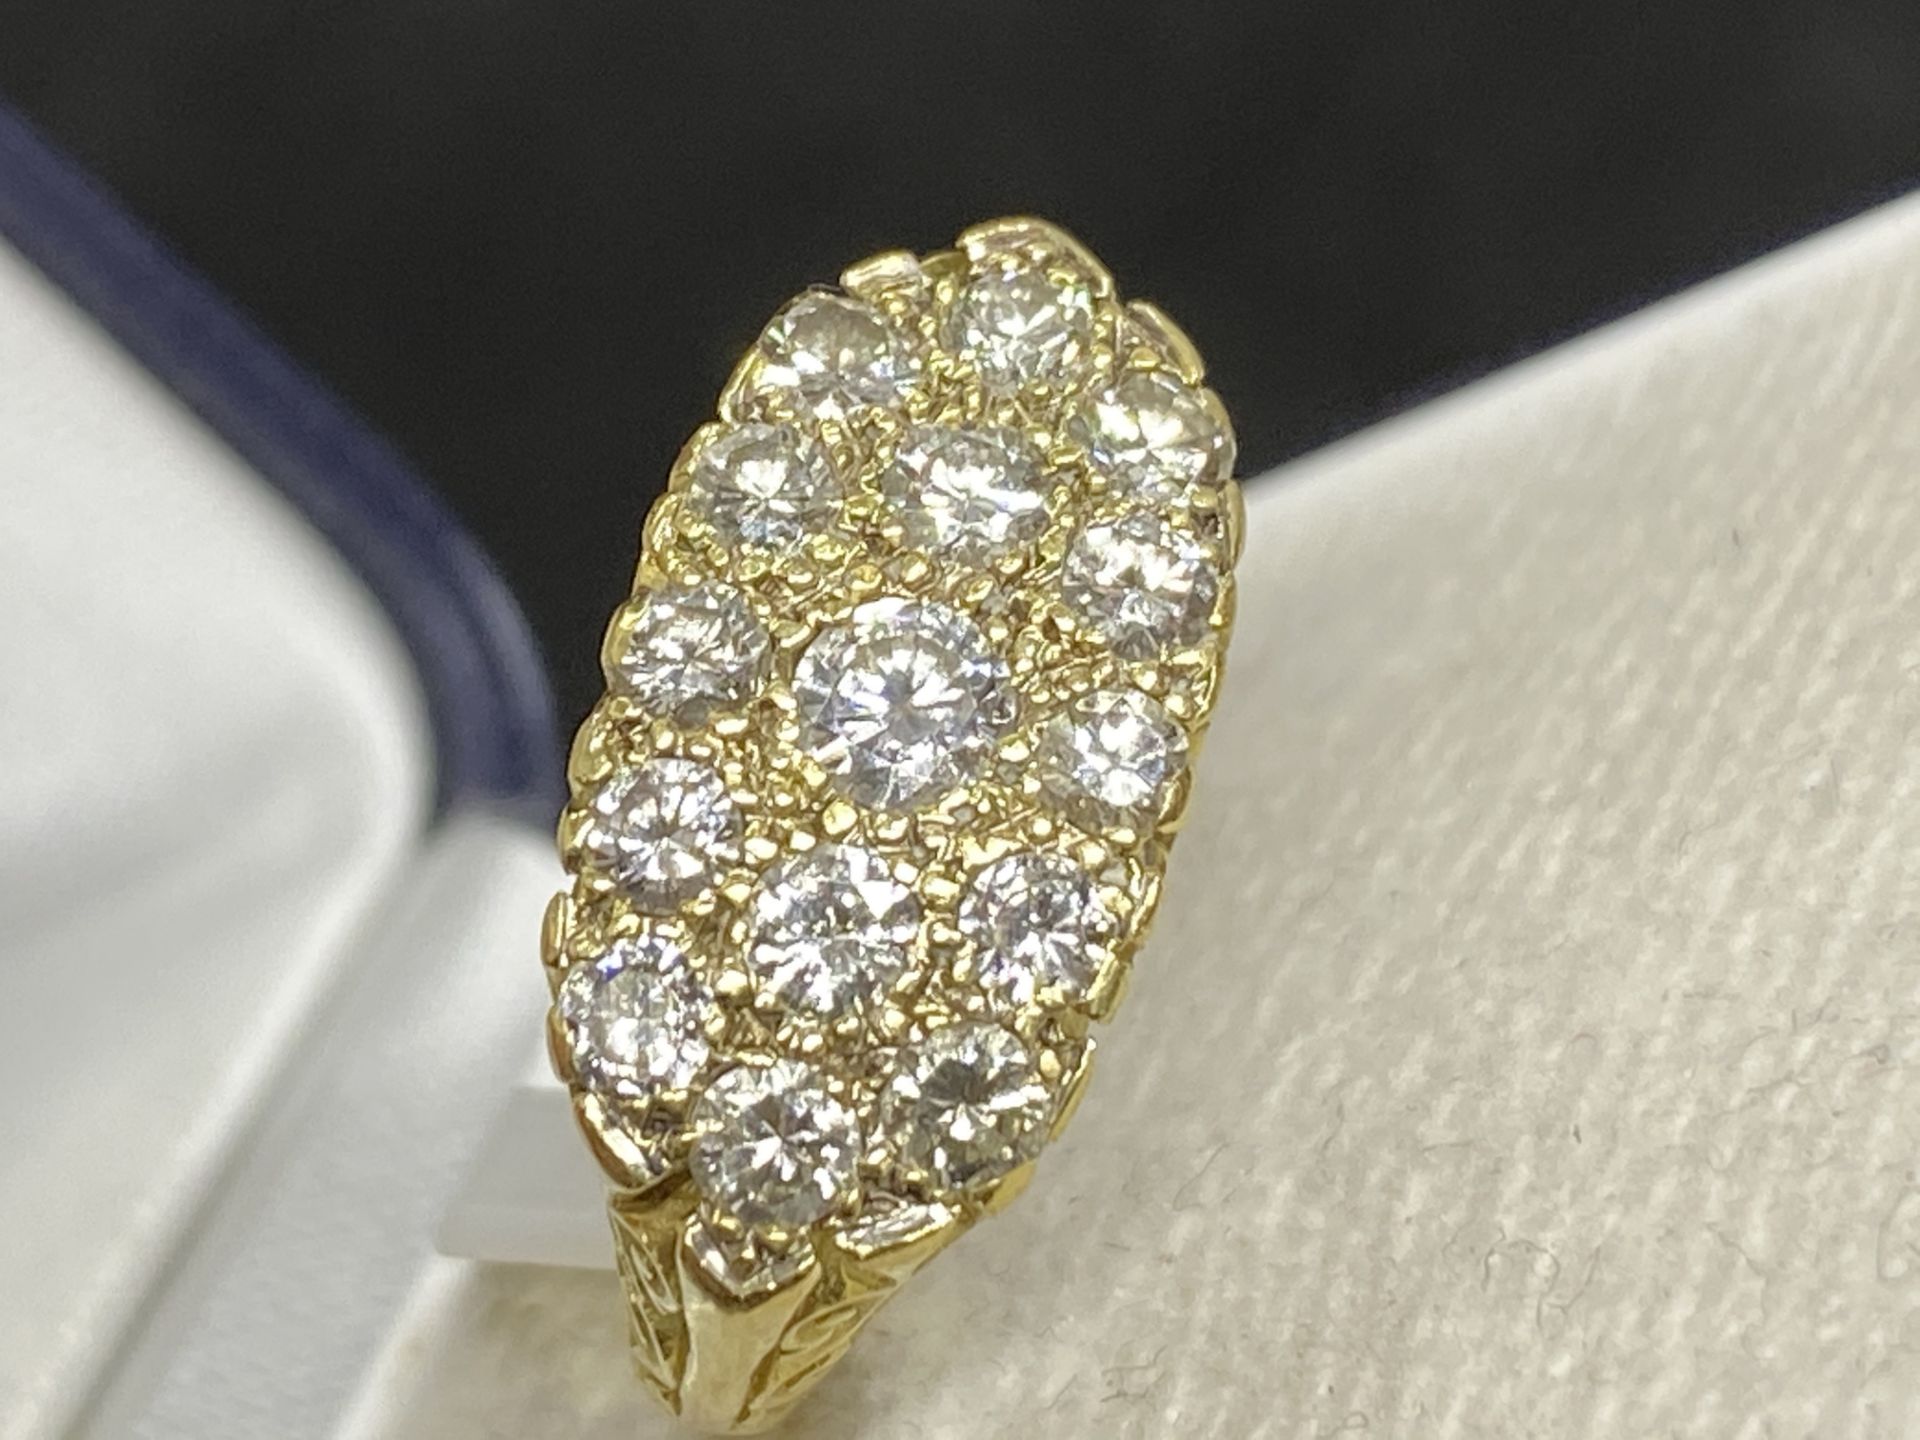 18ct YELLOW GOLD 3.27ct DIAMOND RING WITH 11K INSURANCE VALUATION - Image 6 of 10